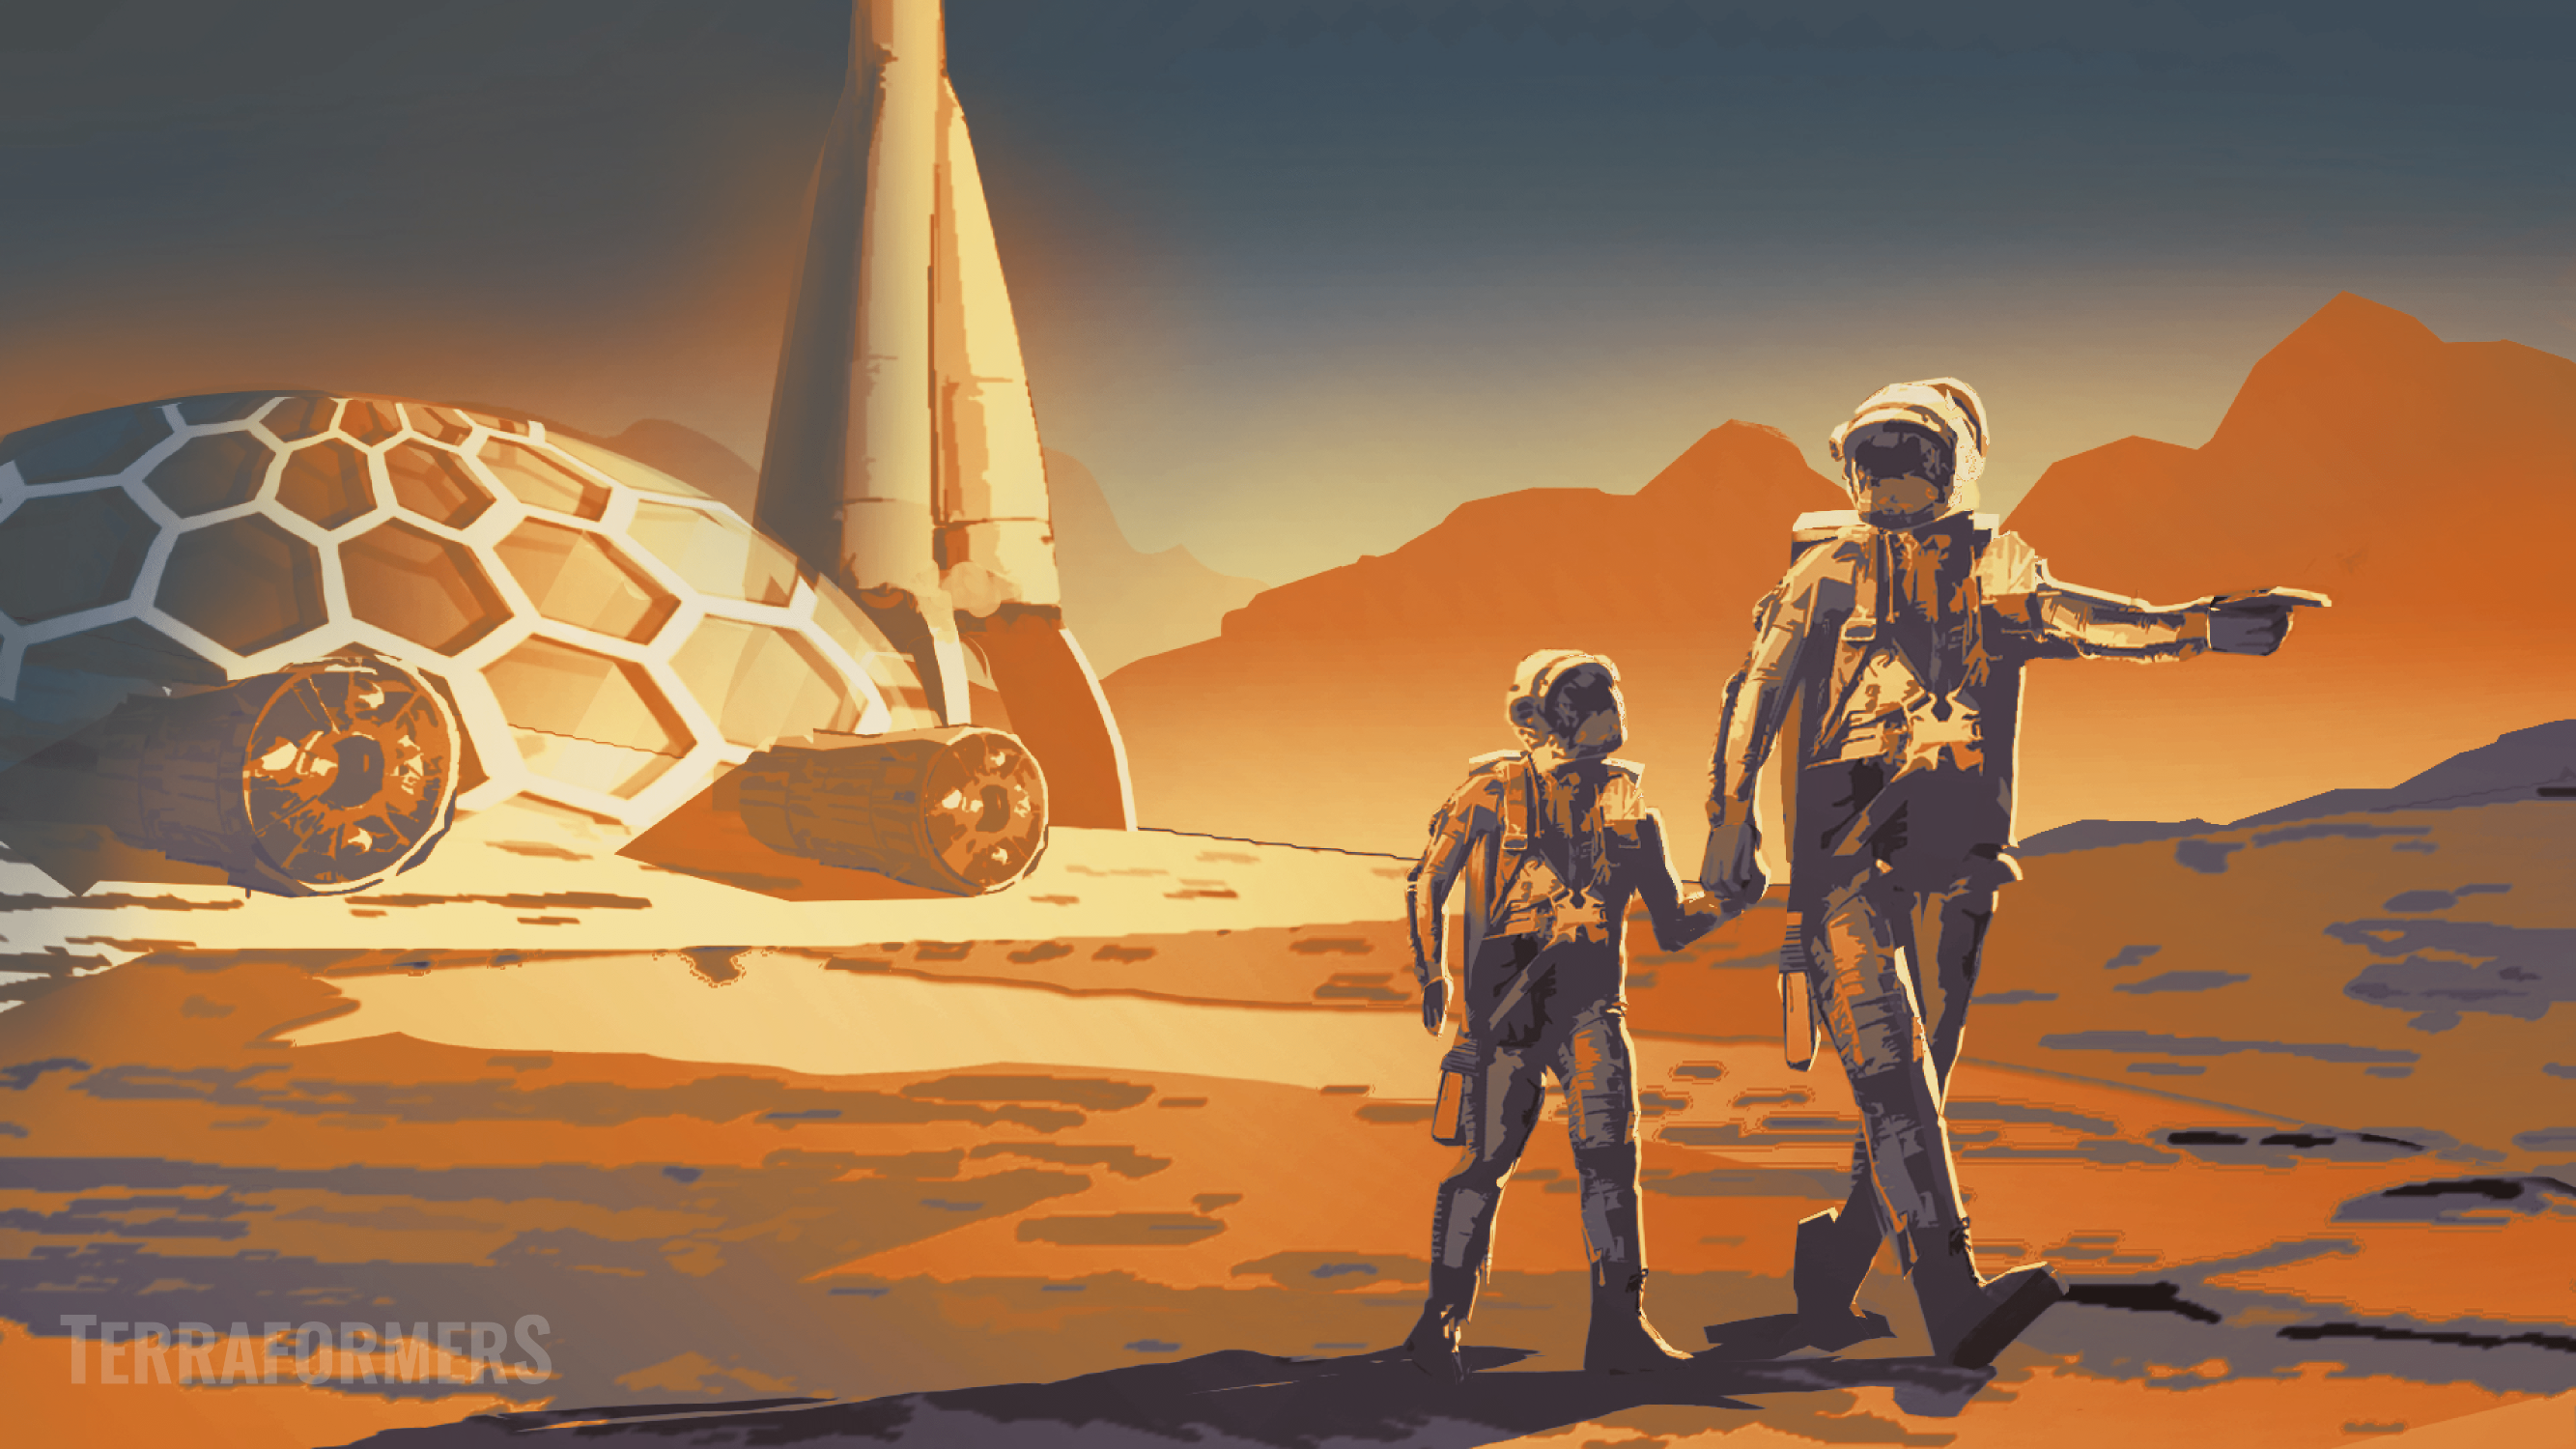 Dome city on Mars, with a girl an her father in martian space suits.